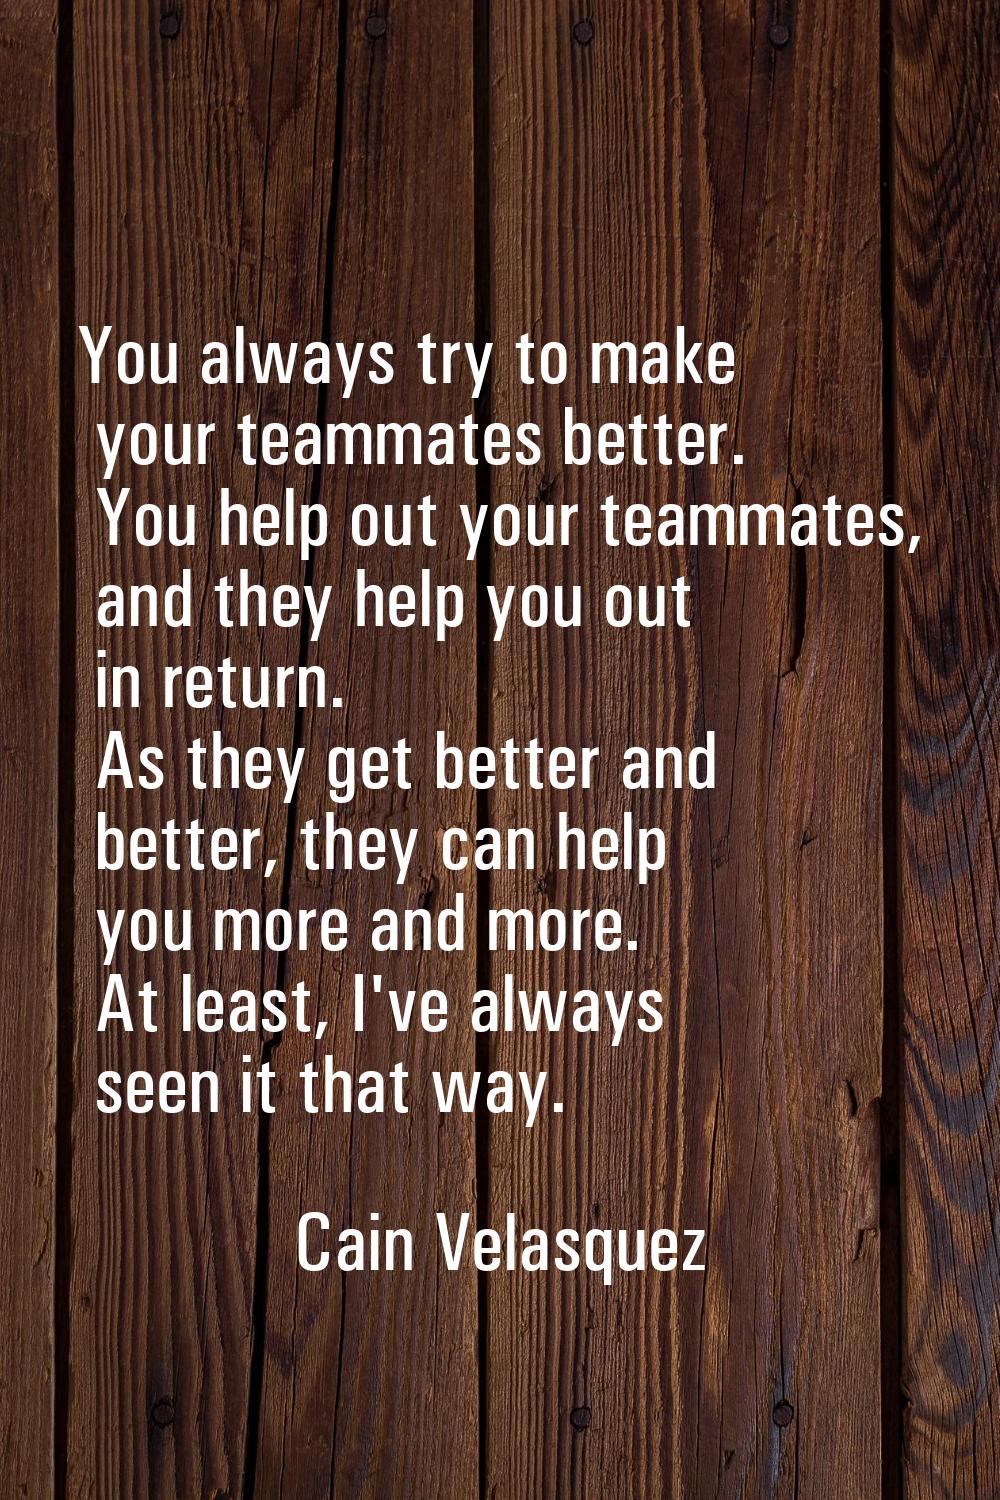 You always try to make your teammates better. You help out your teammates, and they help you out in